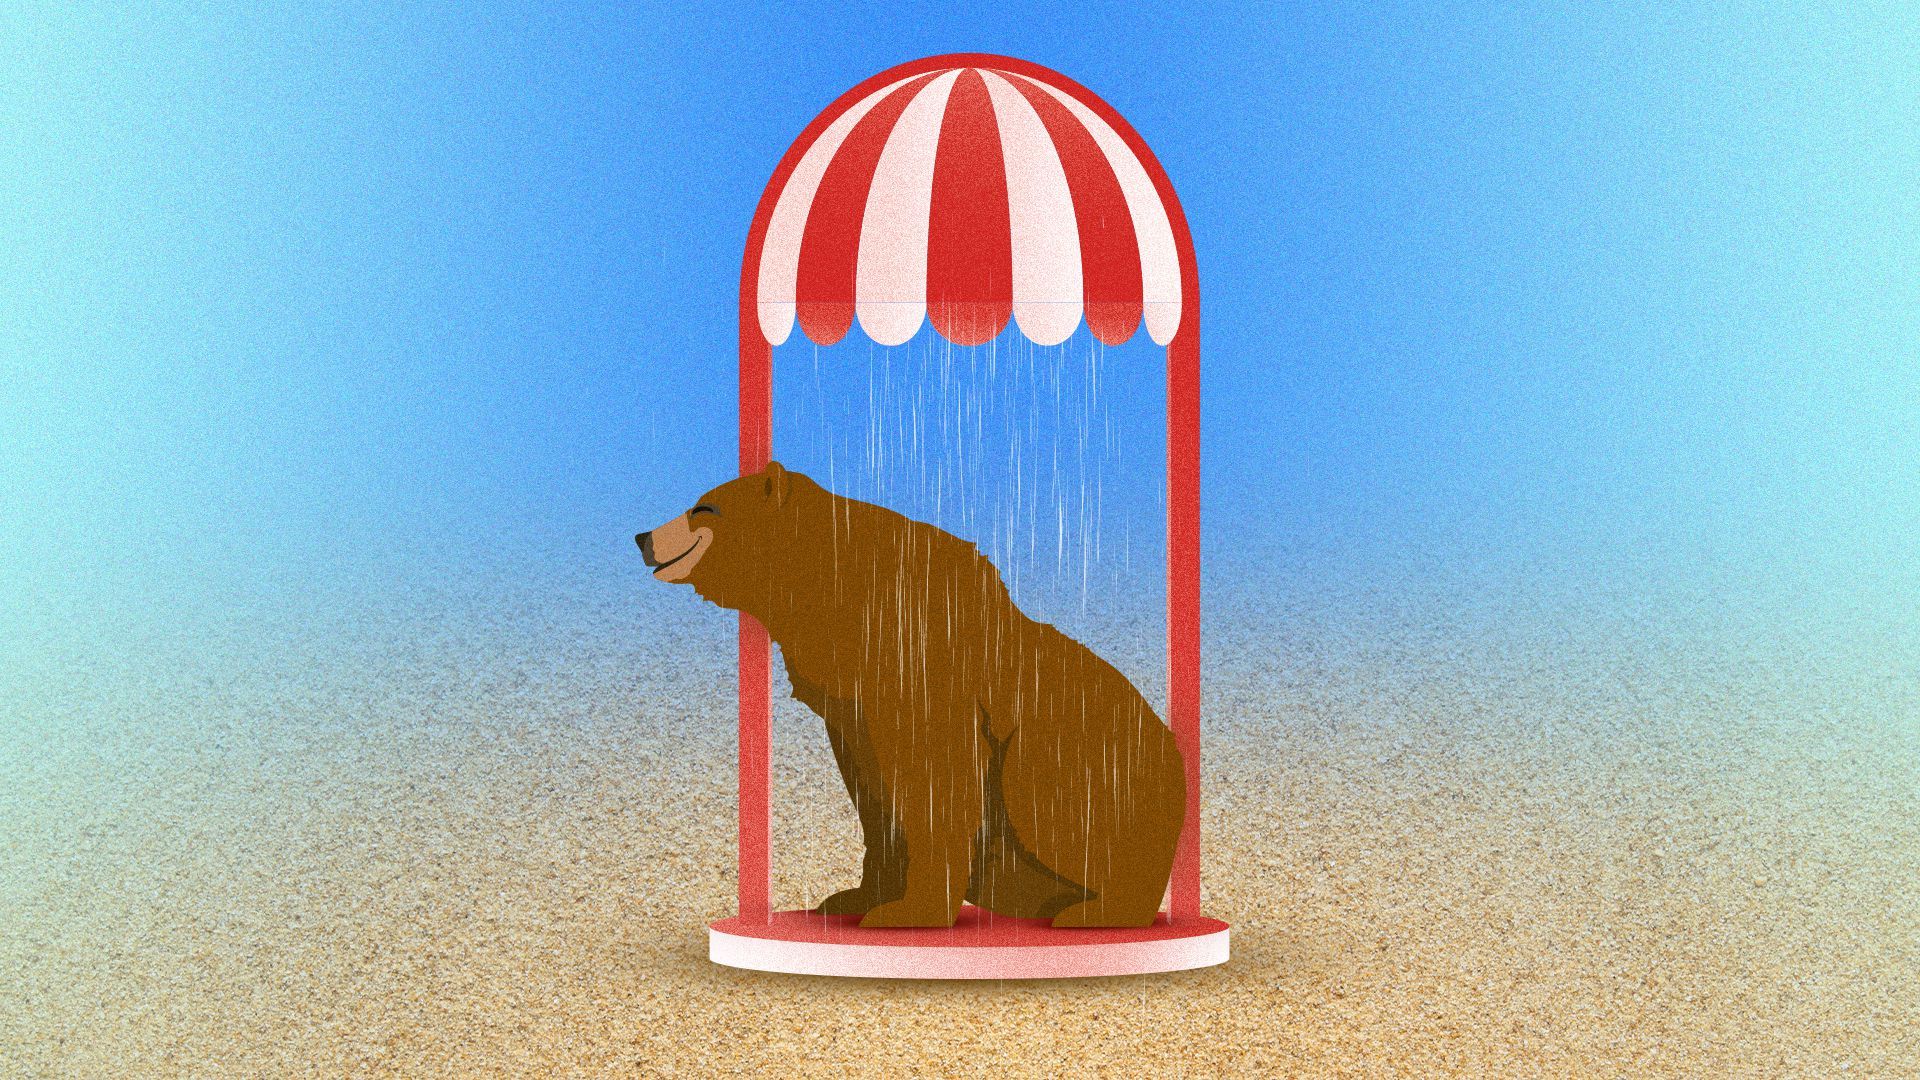 Illustration of the California flag bear sitting in a booth on a beach and the booth is raining inside.